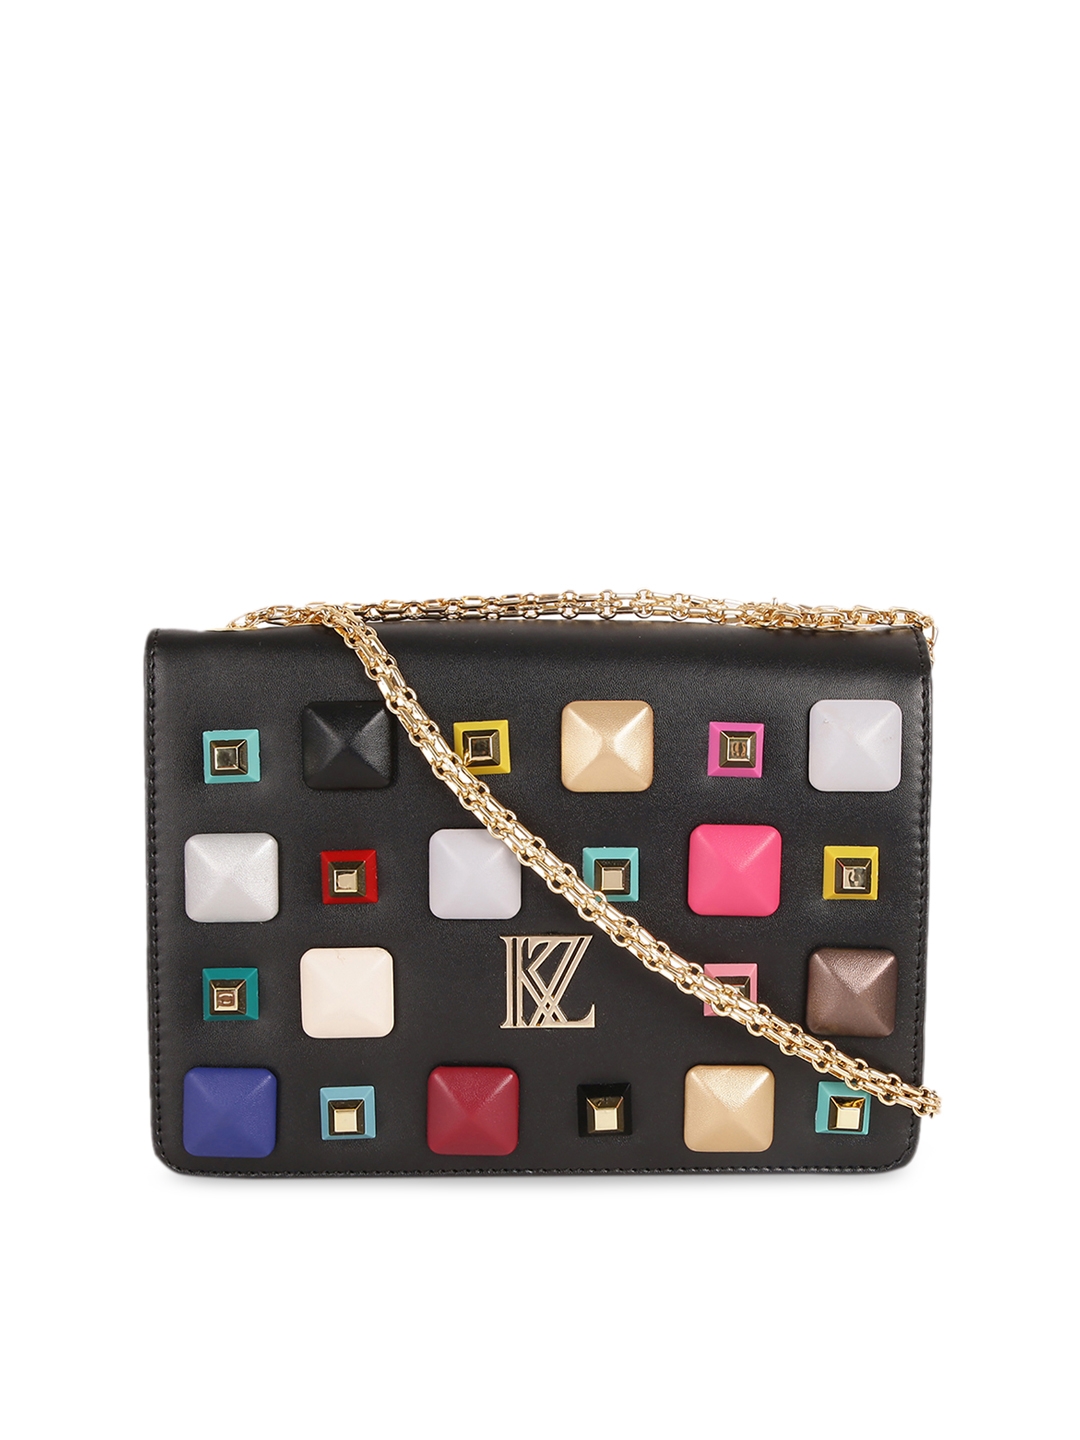 Accessorize Clutch Purses outlet - 1800 products on sale | FASHIOLA.co.uk